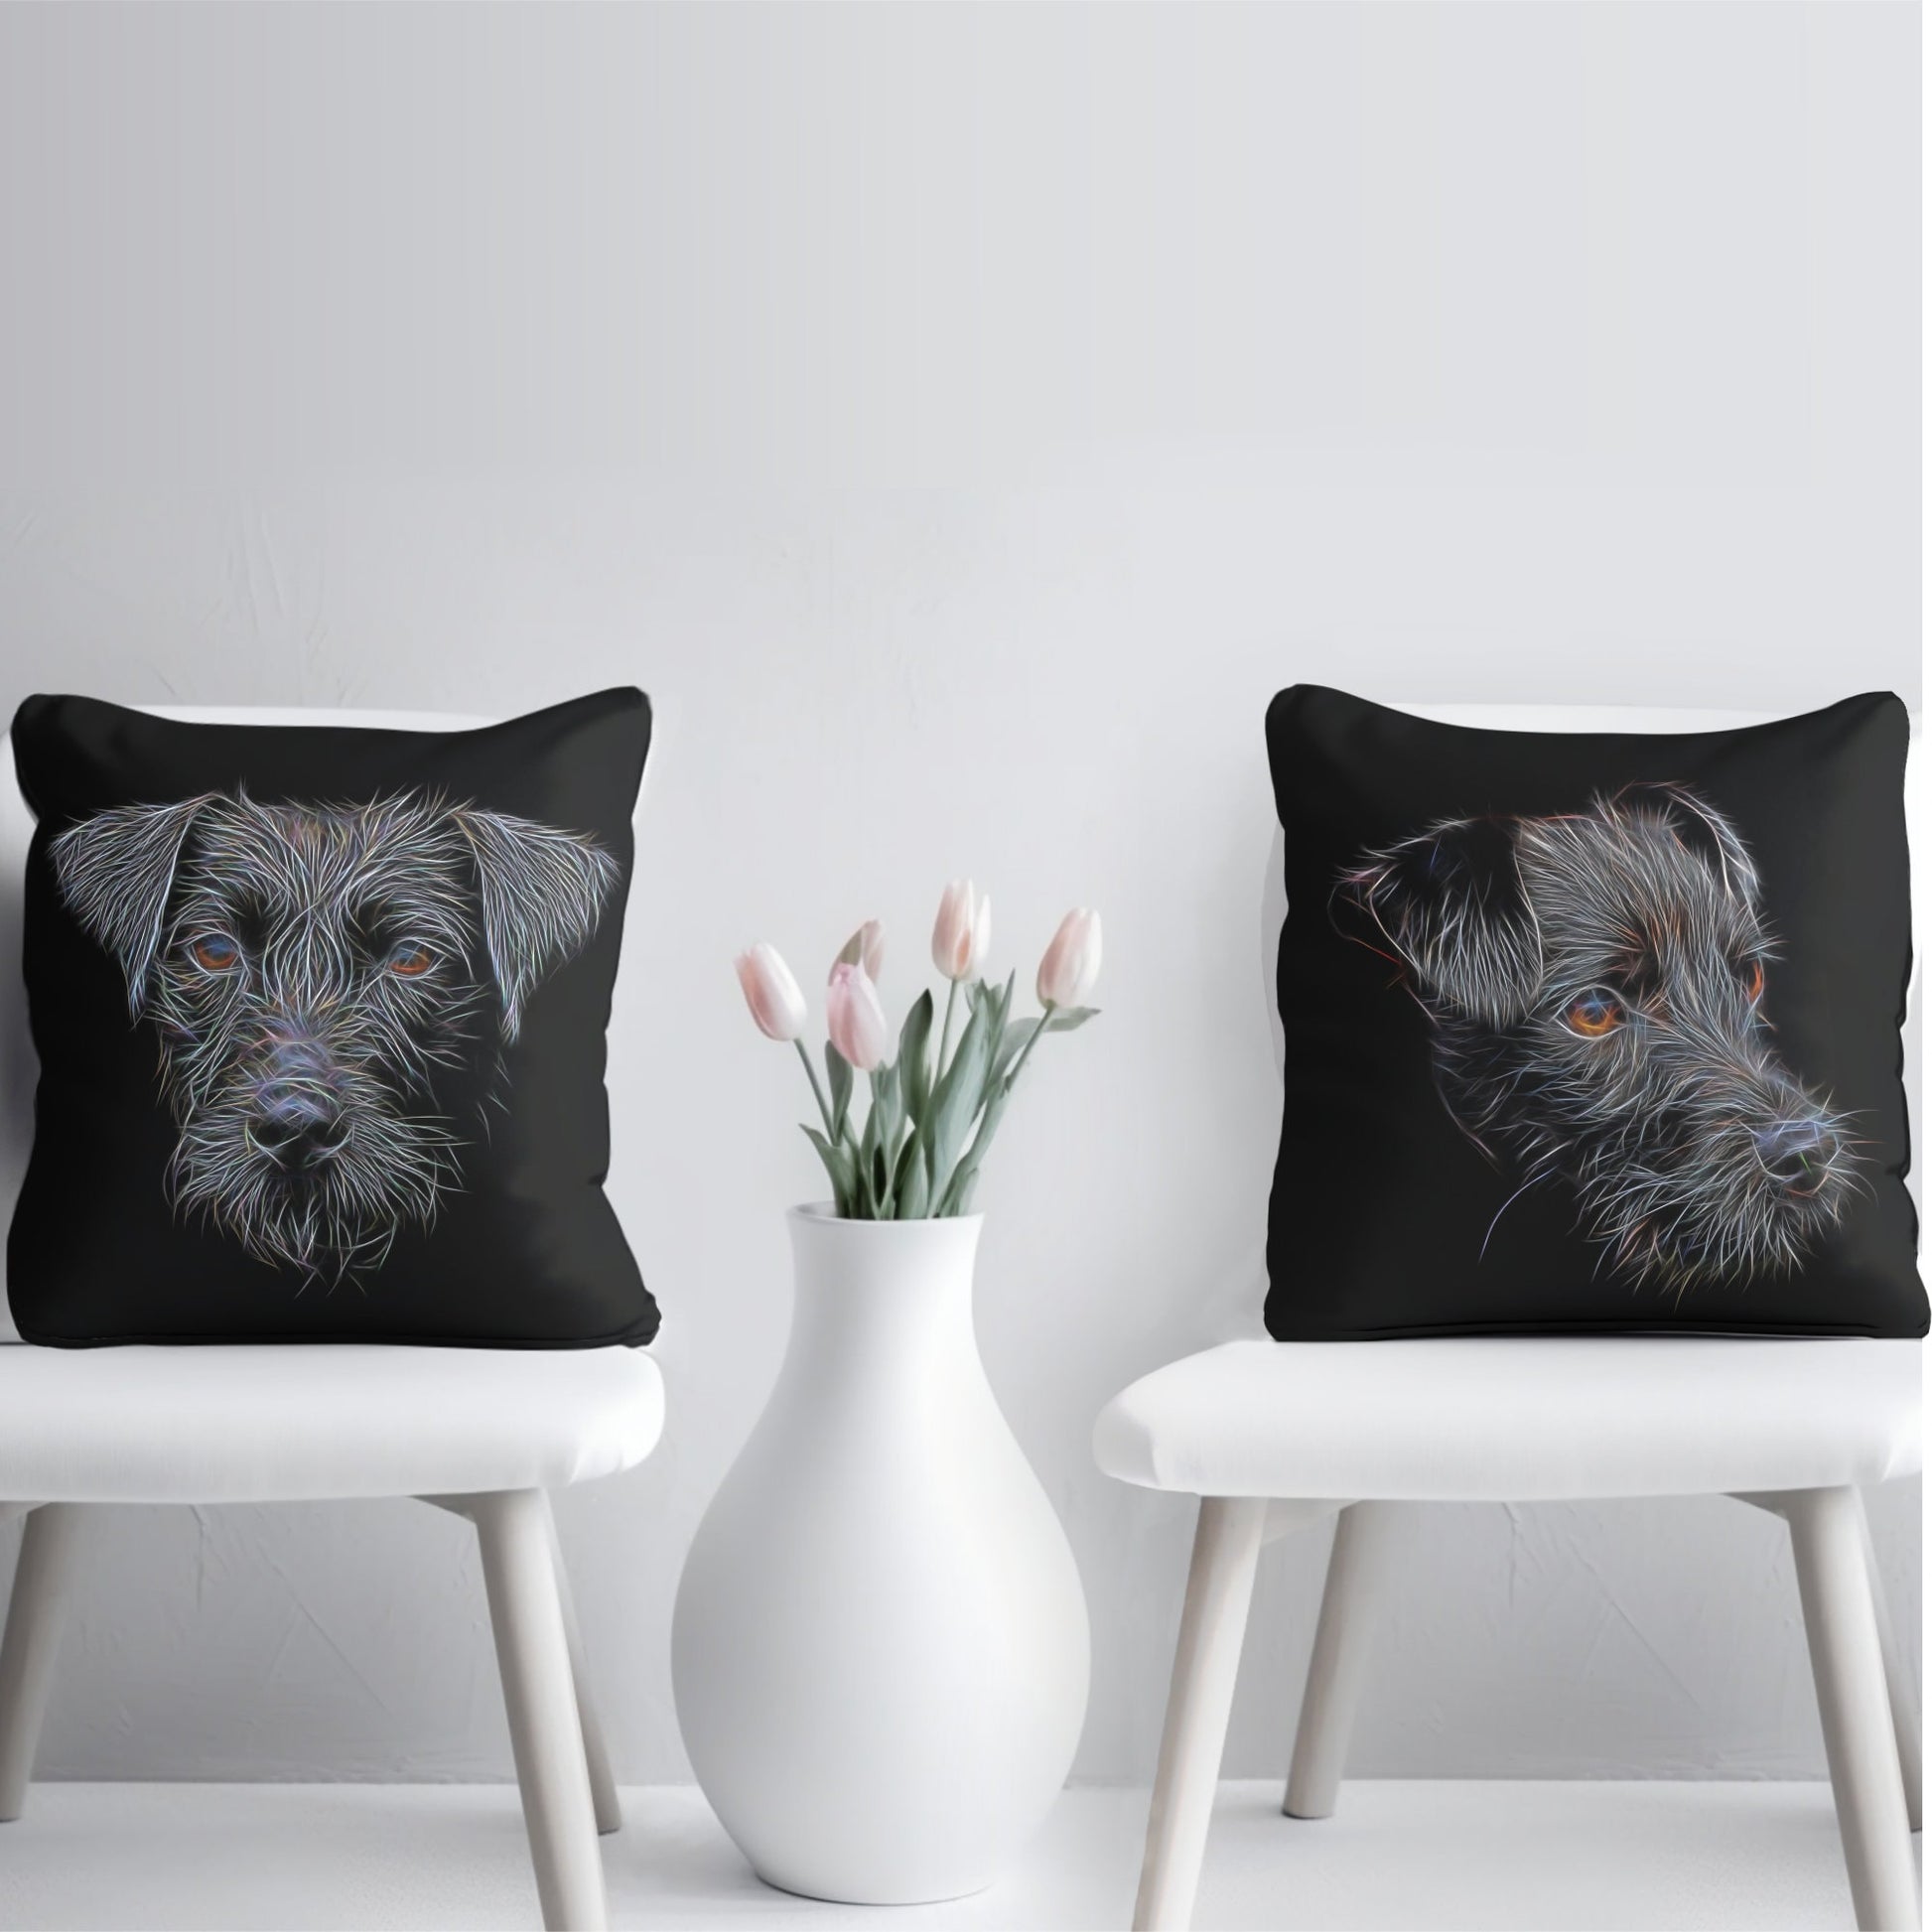 Patterdale Terrier Cushion and Insert